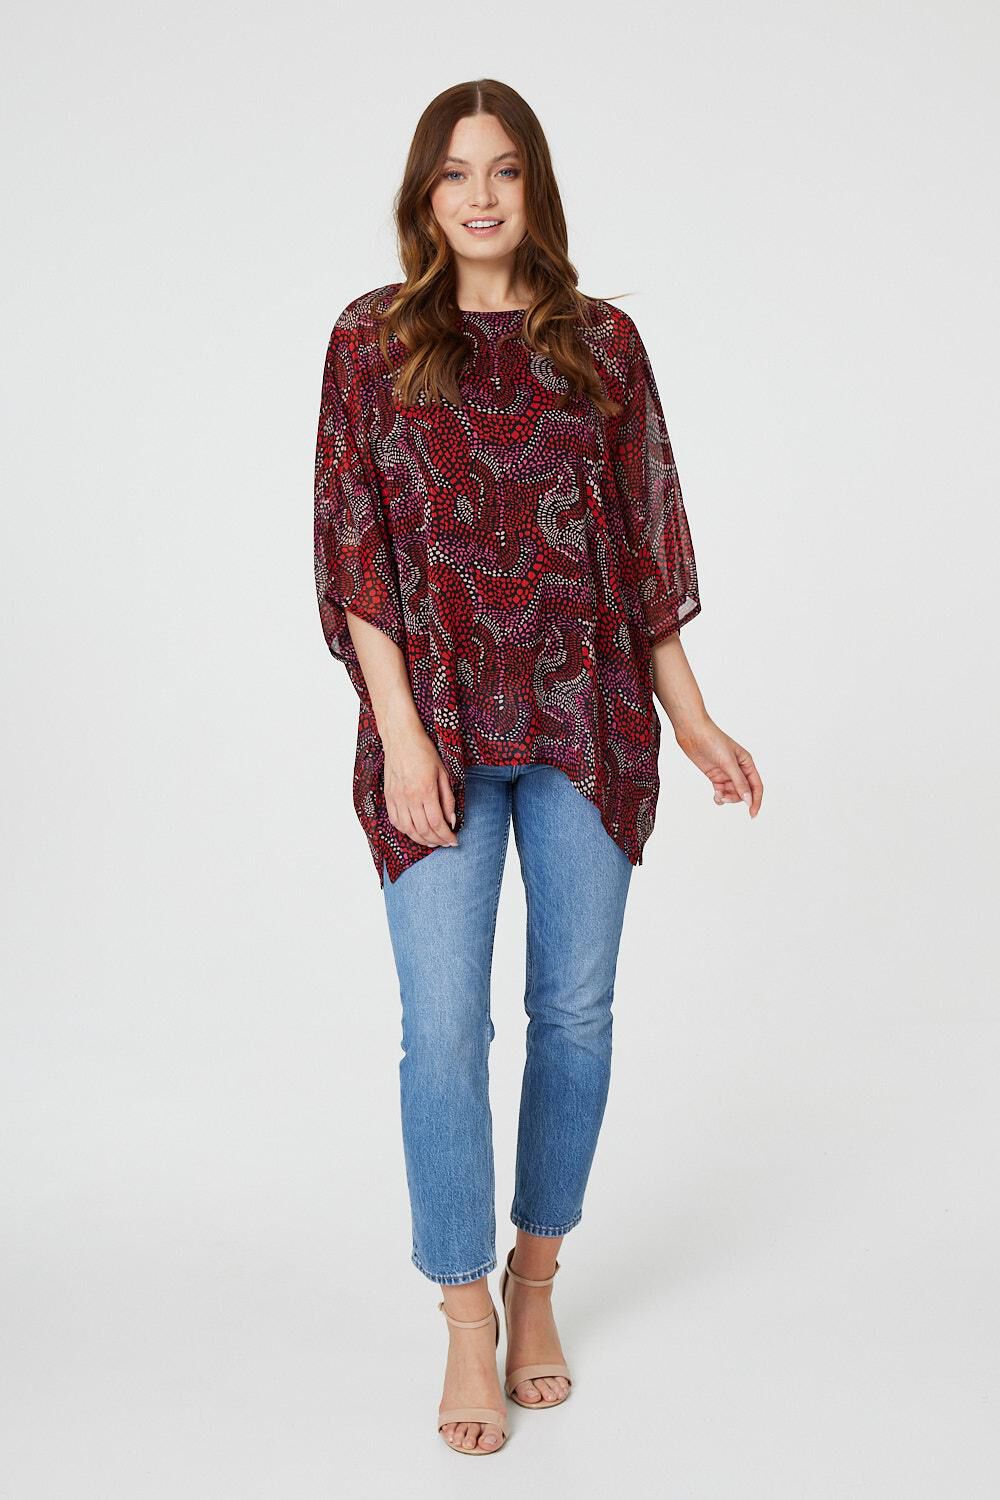 Izabel London Red - Printed 3/4 Sleeve Oversized Top, Size: 10